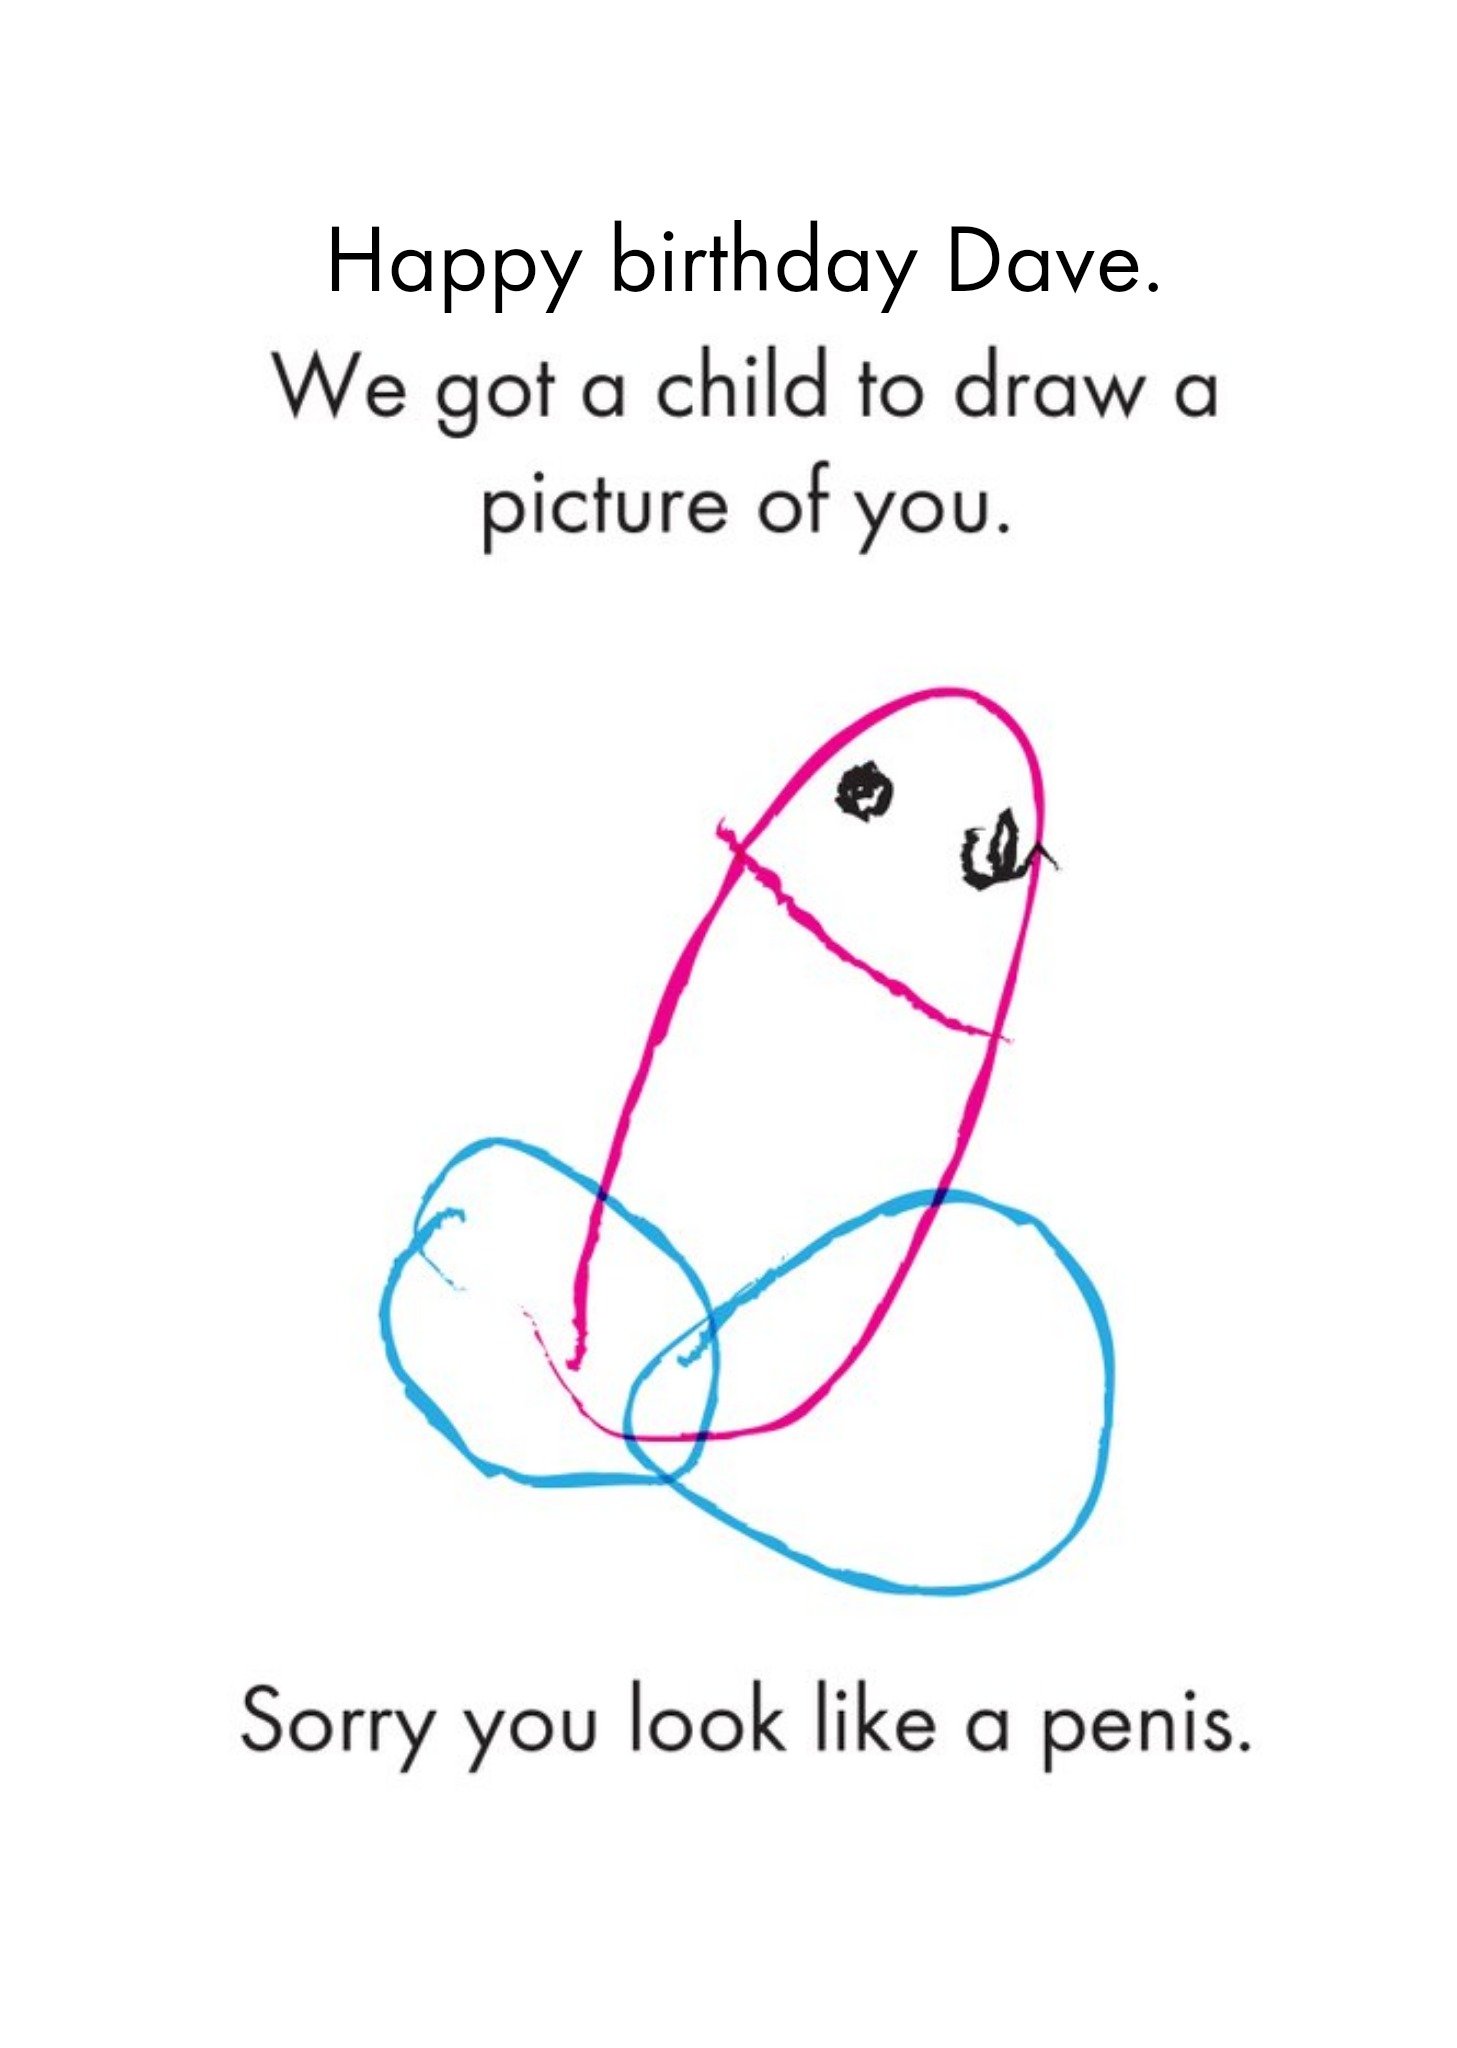 Moonpig Objectables Got A Child To Draw A Picture Of You Funny Birthday Card Ecard